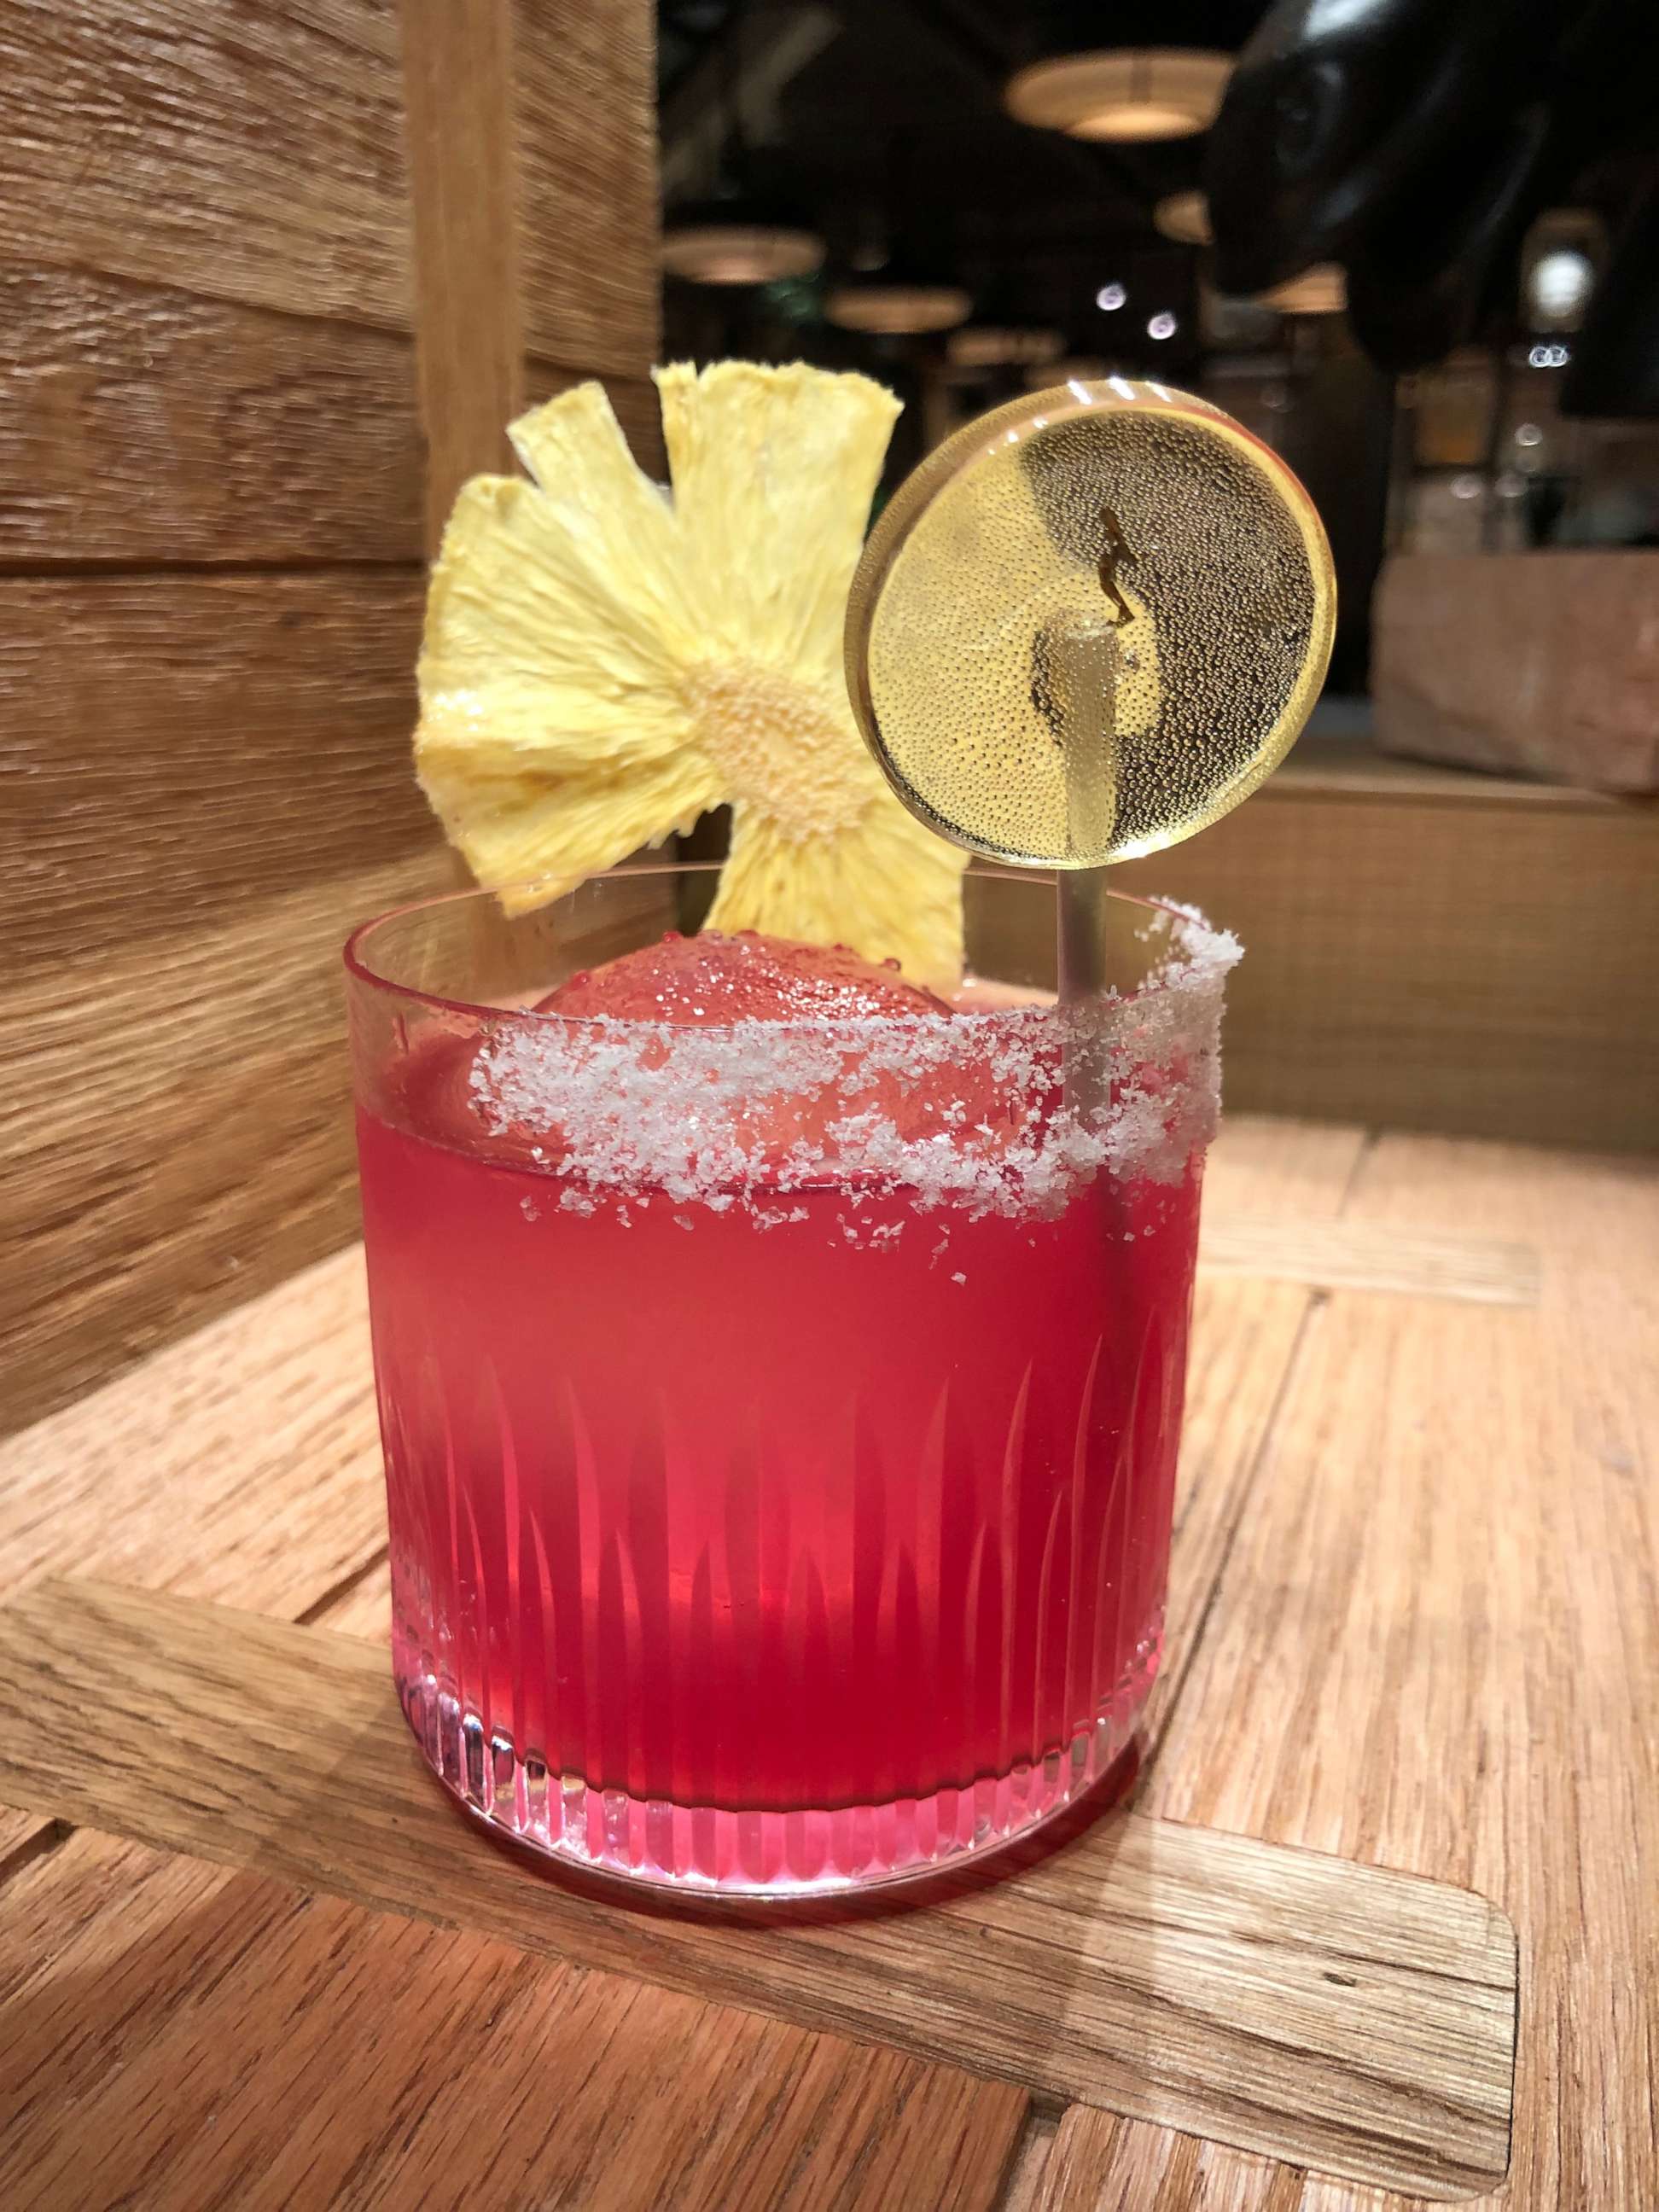 PHOTO: The Rosa cocktail made with tequila and prickly pear.